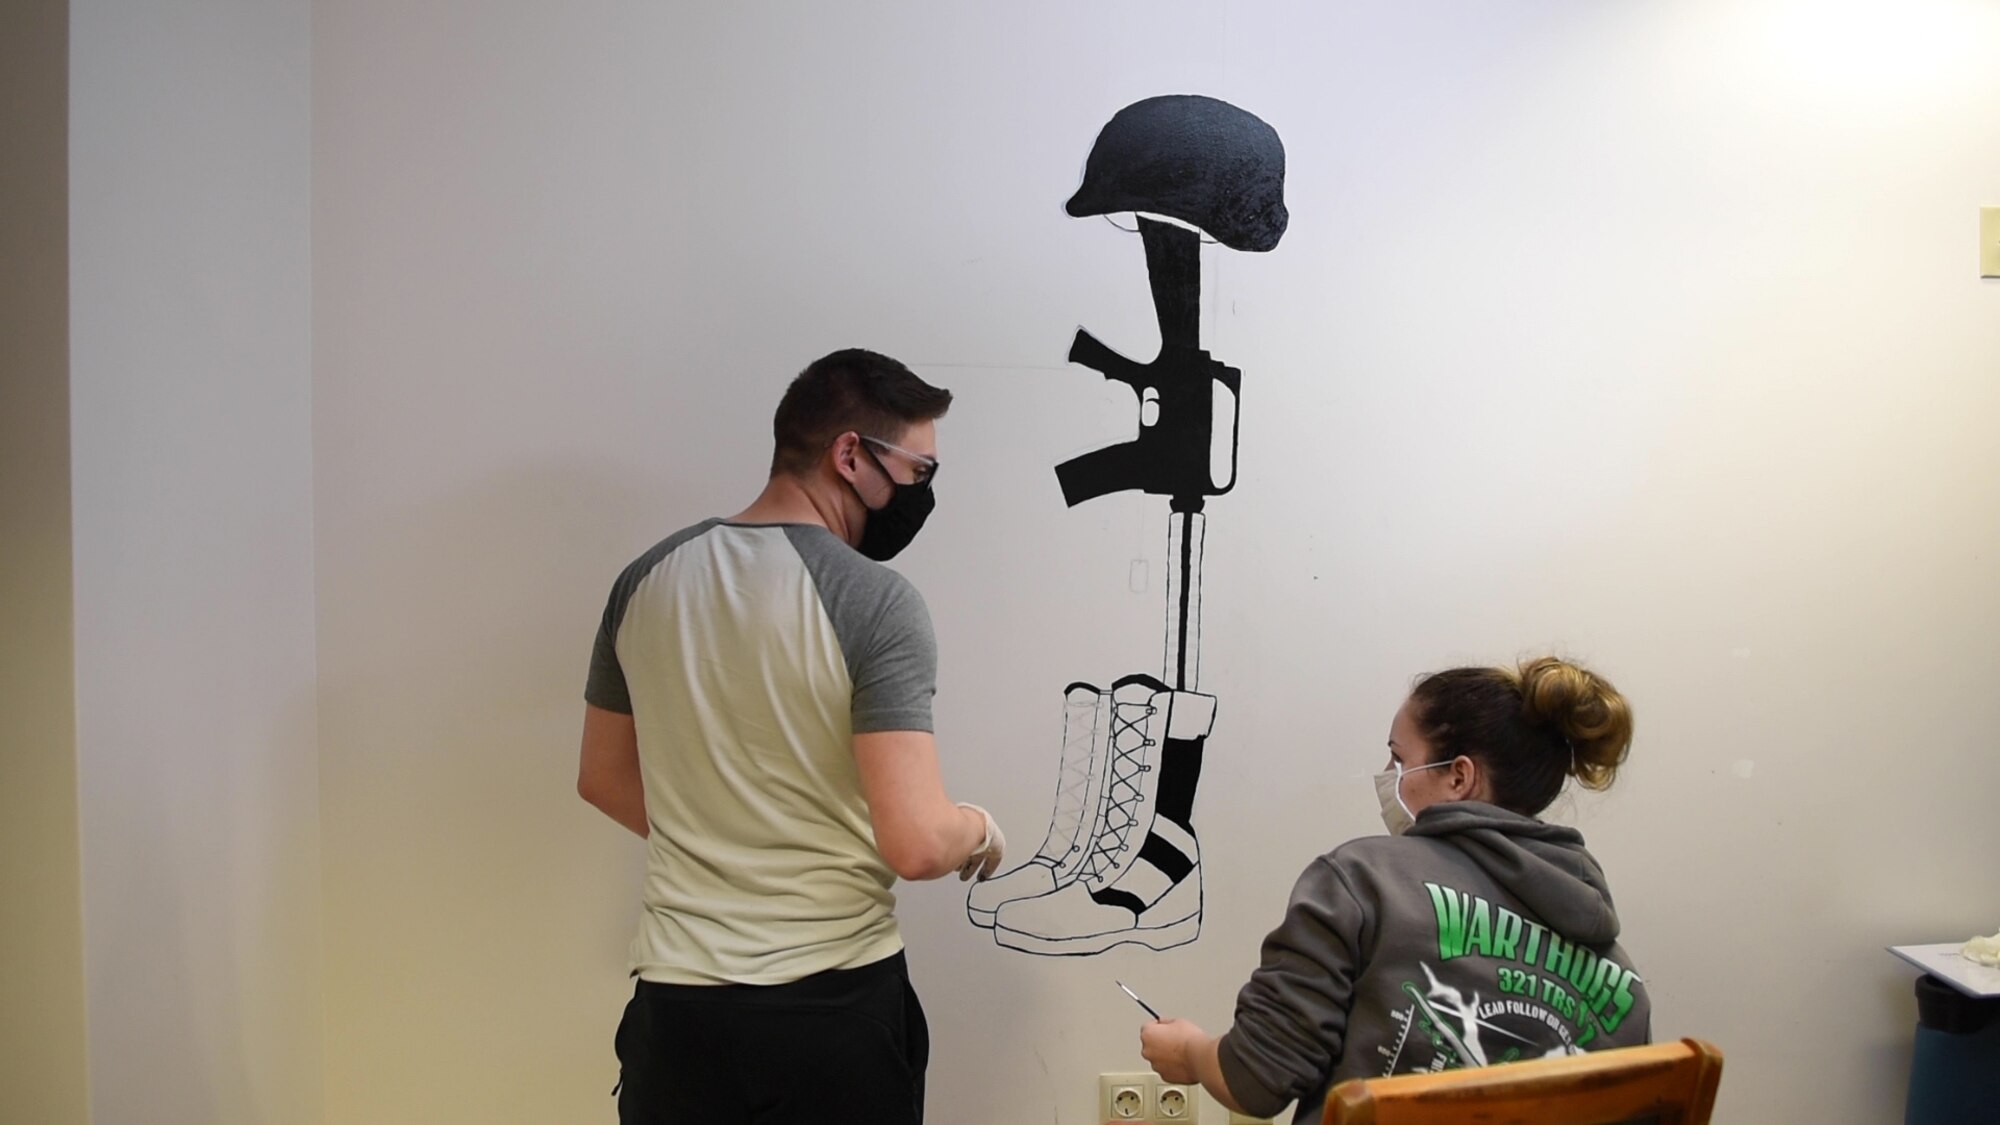 U.S. Air Force Senior Airman Tyler Menz, 39th Security Forces Squadron unit training instructor, left, and Airman 1st Class Anna Whittington, 39th SFS commander’s support staff, talk while painting a mural April 23, 2020, at Incirlik Air Base, Turkey. The Airmen embarked on this project to honor security forces heritage in the security forces dormitories. (U.S. Air Force photo by Staff Sgt. Joshua Magbanua)